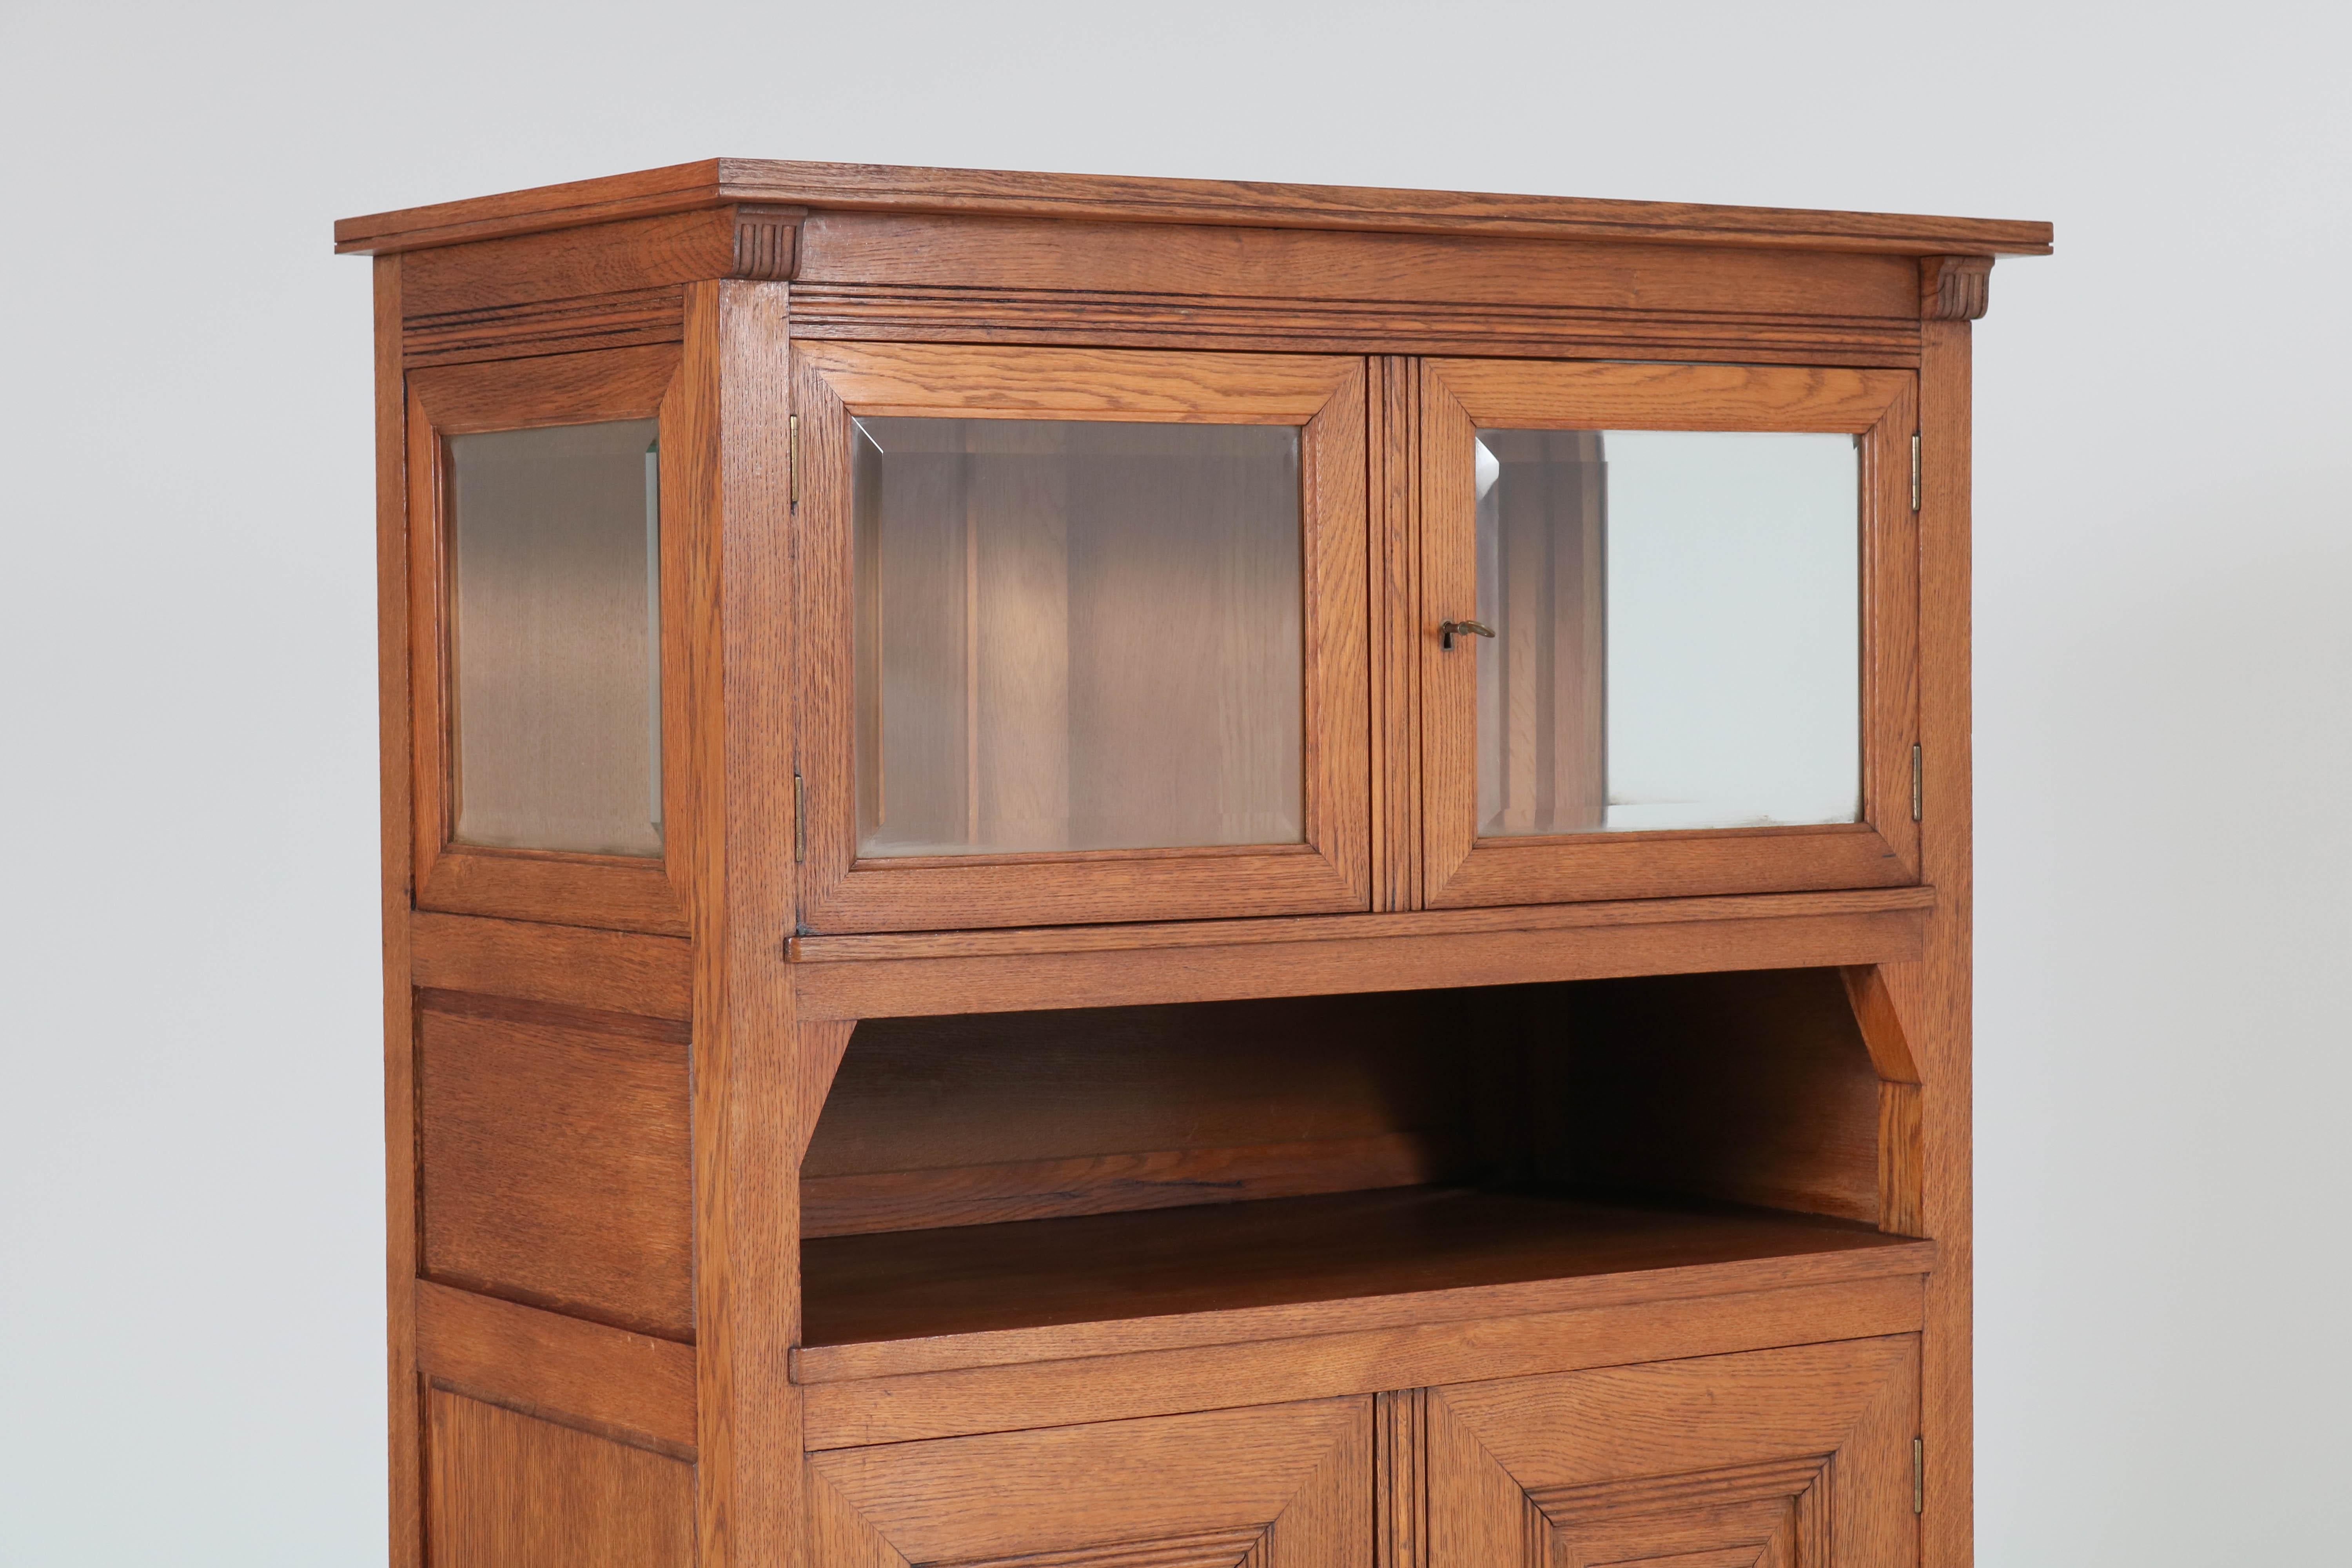 Early 20th Century Oak Art Nouveau Arts & Crafts Bookcase by A.R. Wittop Koning for J.A. Huizinga